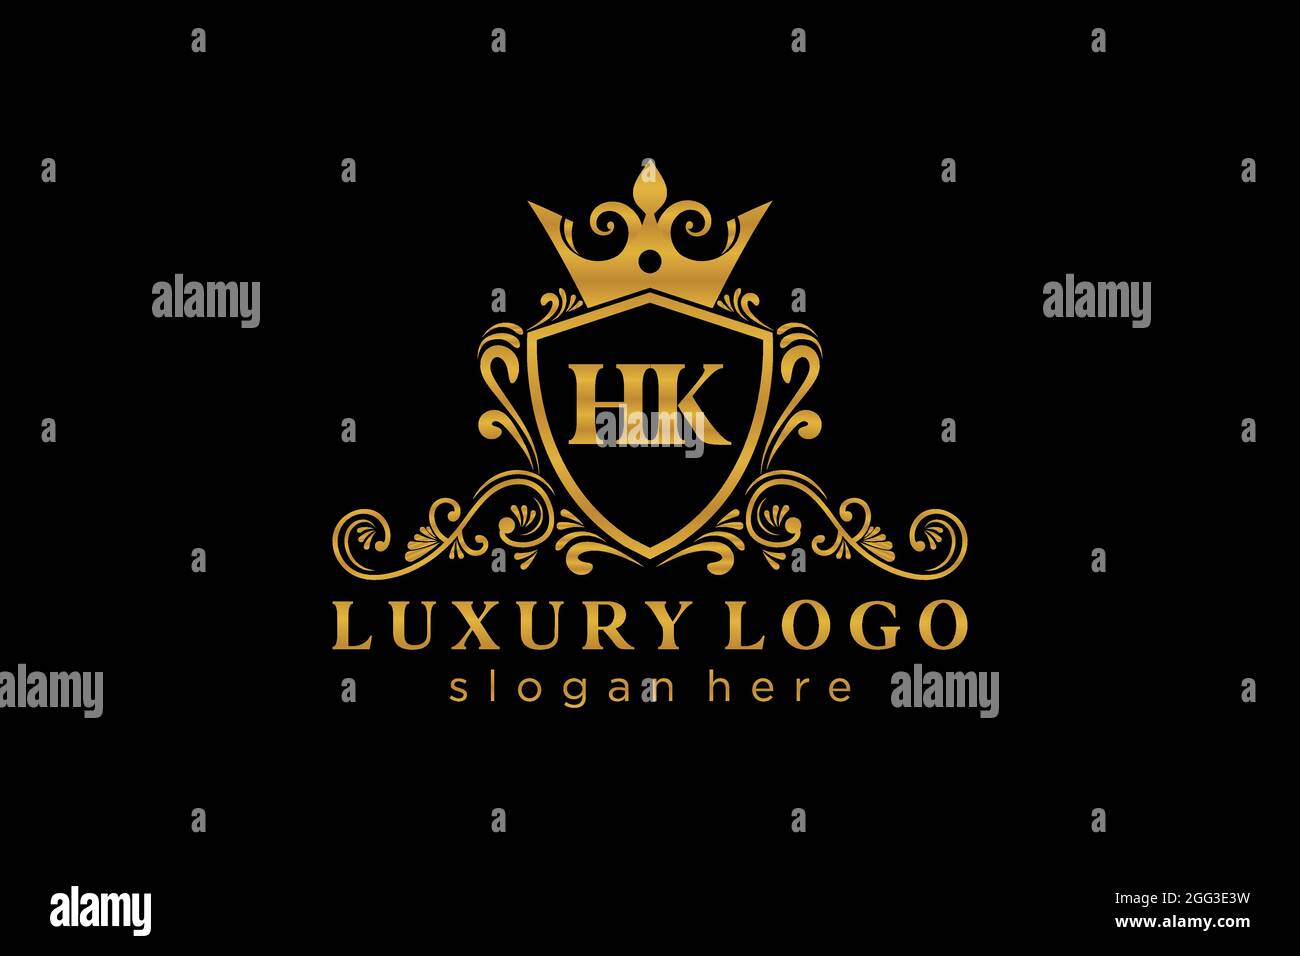 HK Letter Royal Luxury Logo template in vector art for Restaurant, Royalty, Boutique, Cafe, Hotel, Heraldic, Jewelry, Fashion and other vector illustr Stock Vector